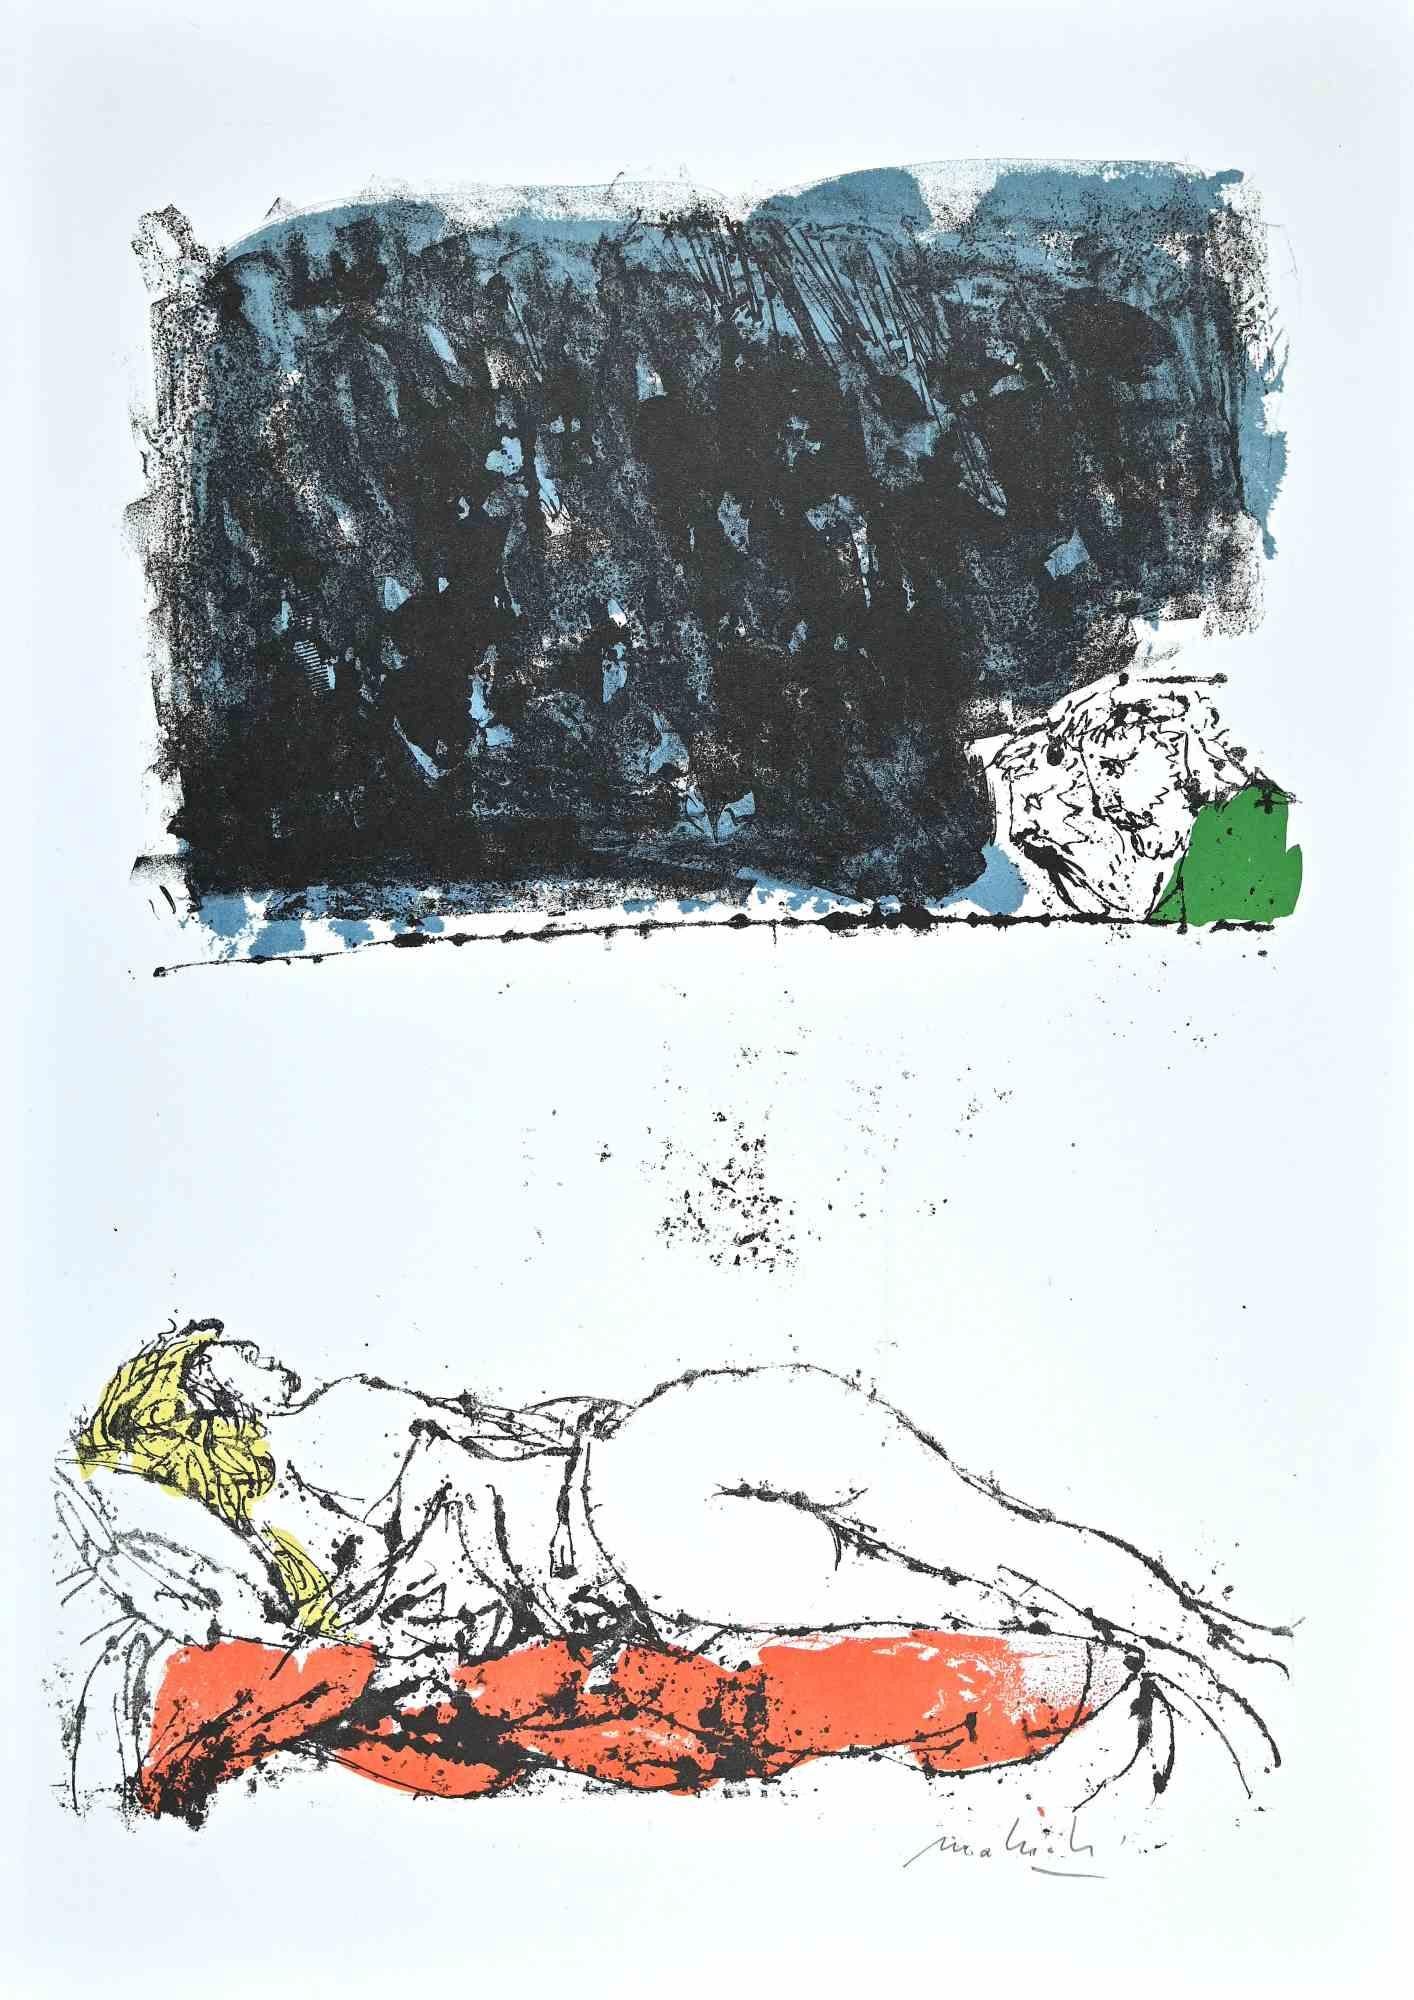 Nude is the original etching and aquatint on paper realized by Carlo Mattioli in the 1970s.

Hand-signed on the lower.

Very good conditions.

The artwork is expressed through deft strokes with minimalistic colors applied in a harmonious manner,